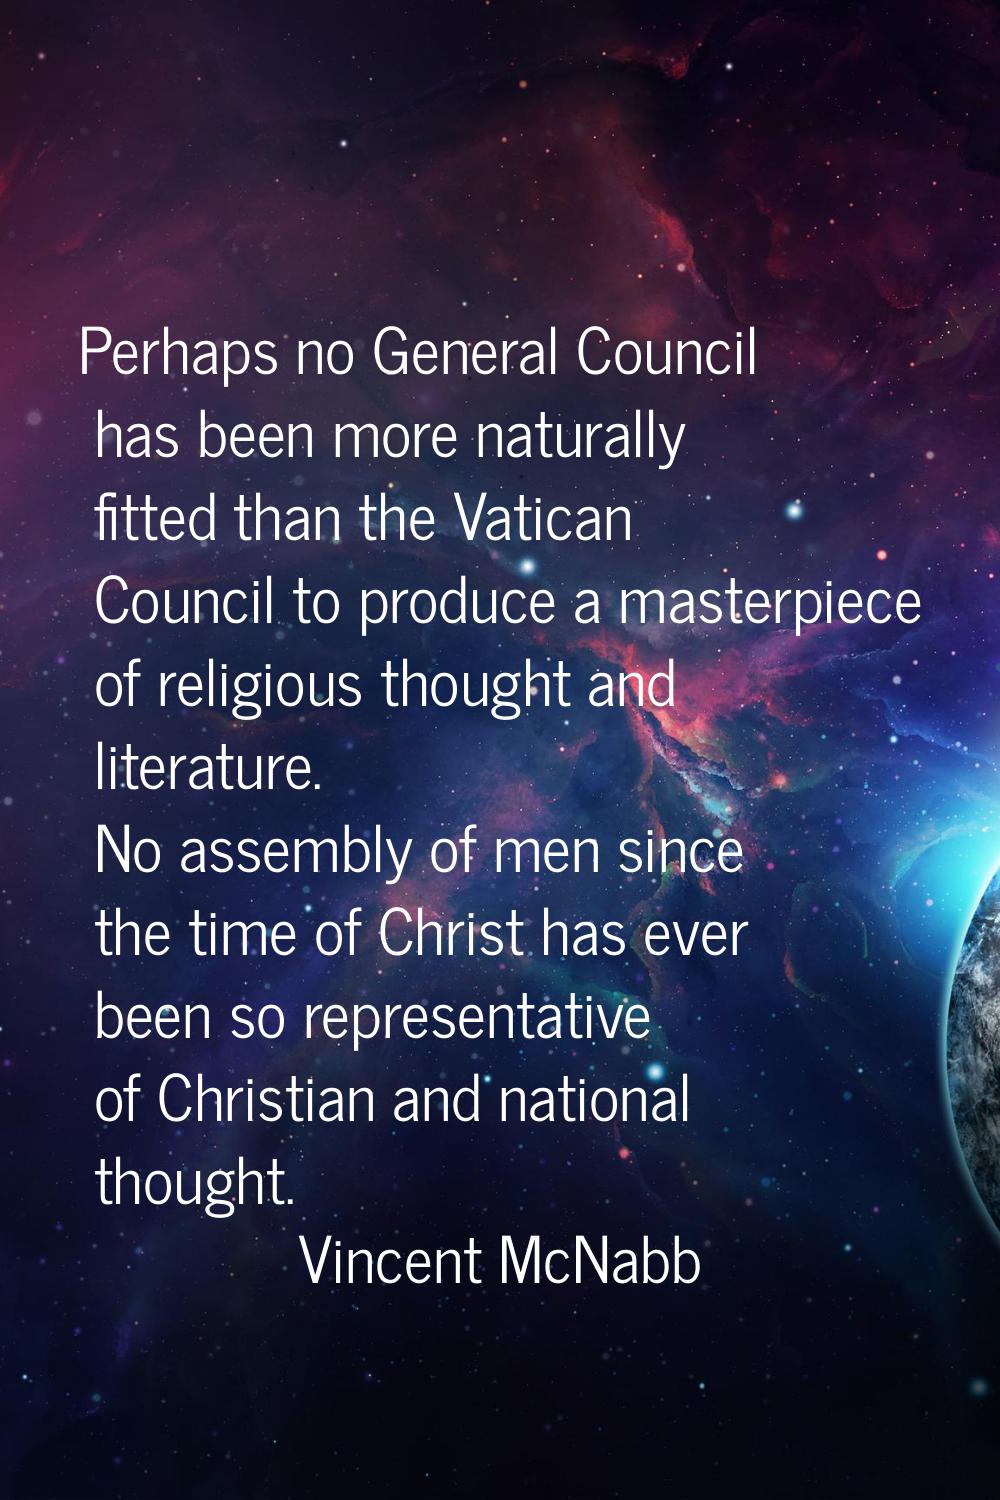 Perhaps no General Council has been more naturally fitted than the Vatican Council to produce a mas